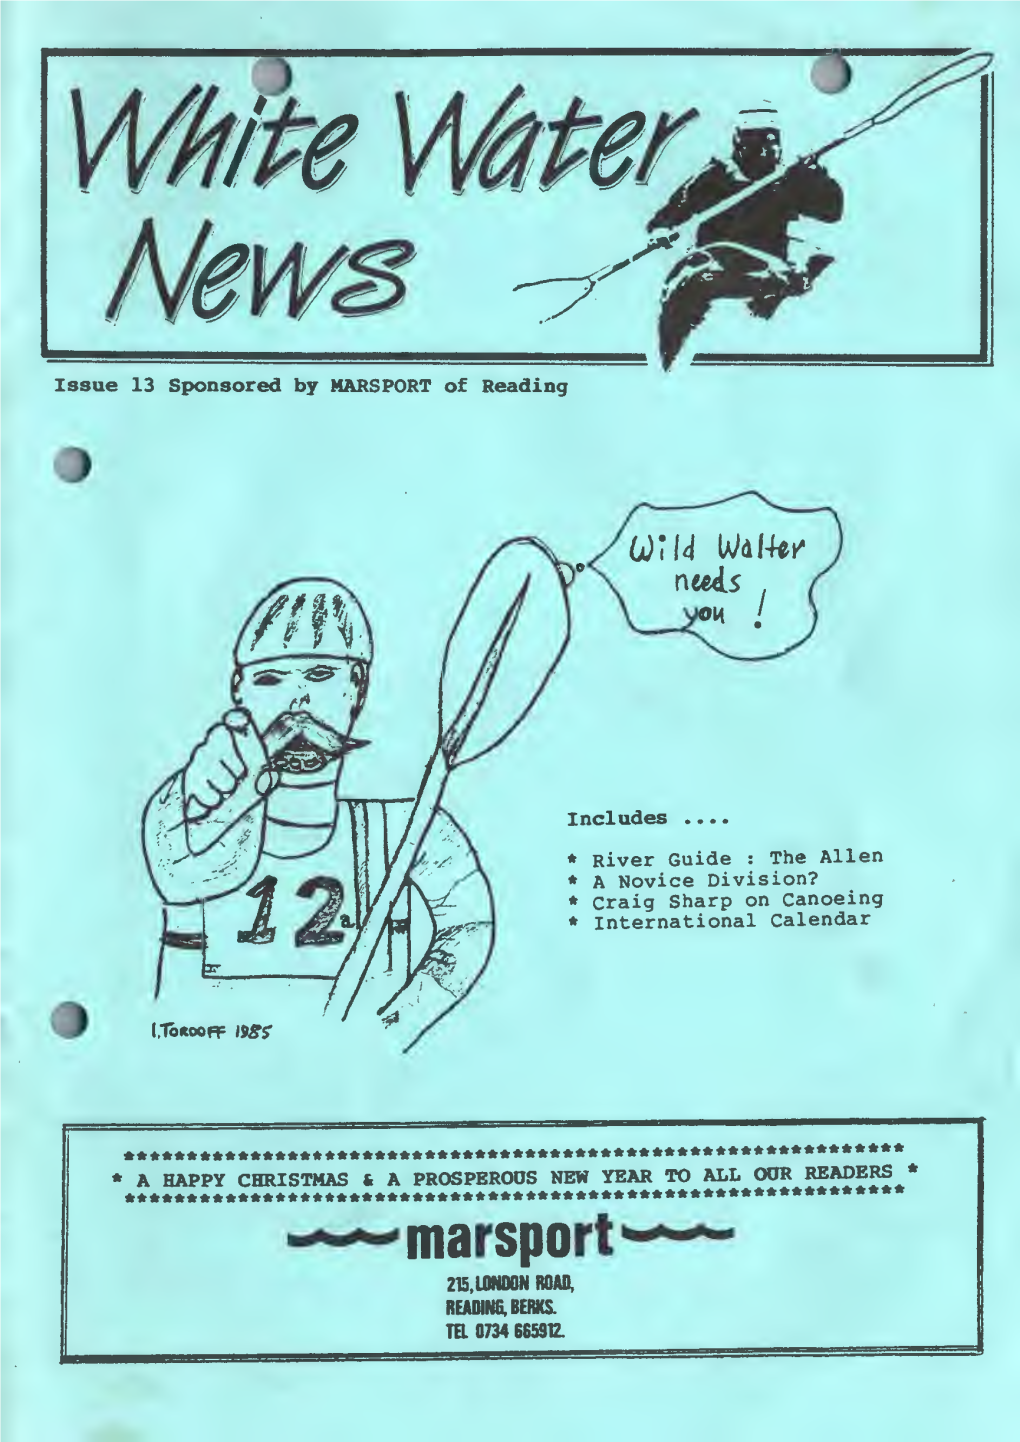 UKW19851200 White Water News Issue 13